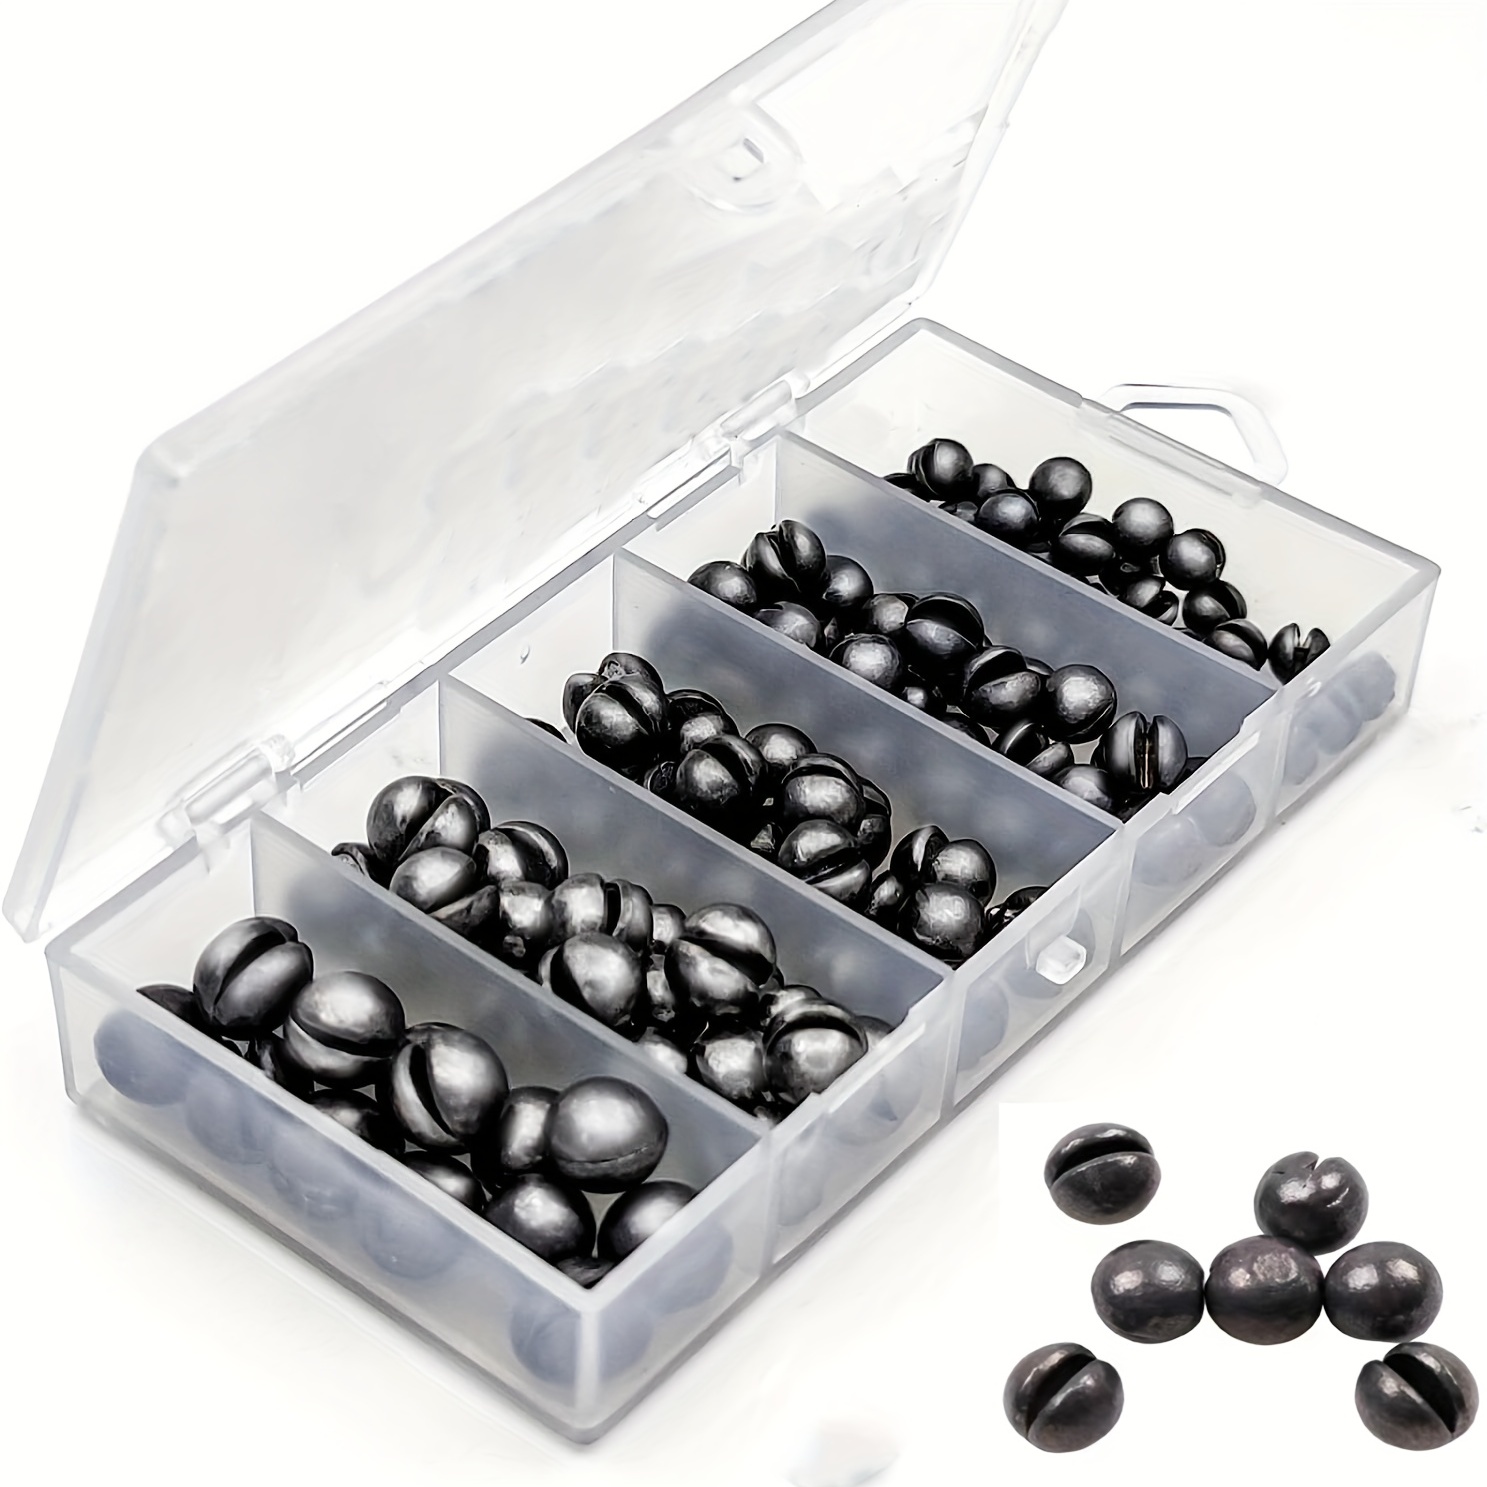 100PCS Fishing Weights Sinkers: 5 Sizes, Including  0.06/0.05/0.04/0.02/0.01ounce(small) - Premium Quality Split Shot Fishing  Weights!